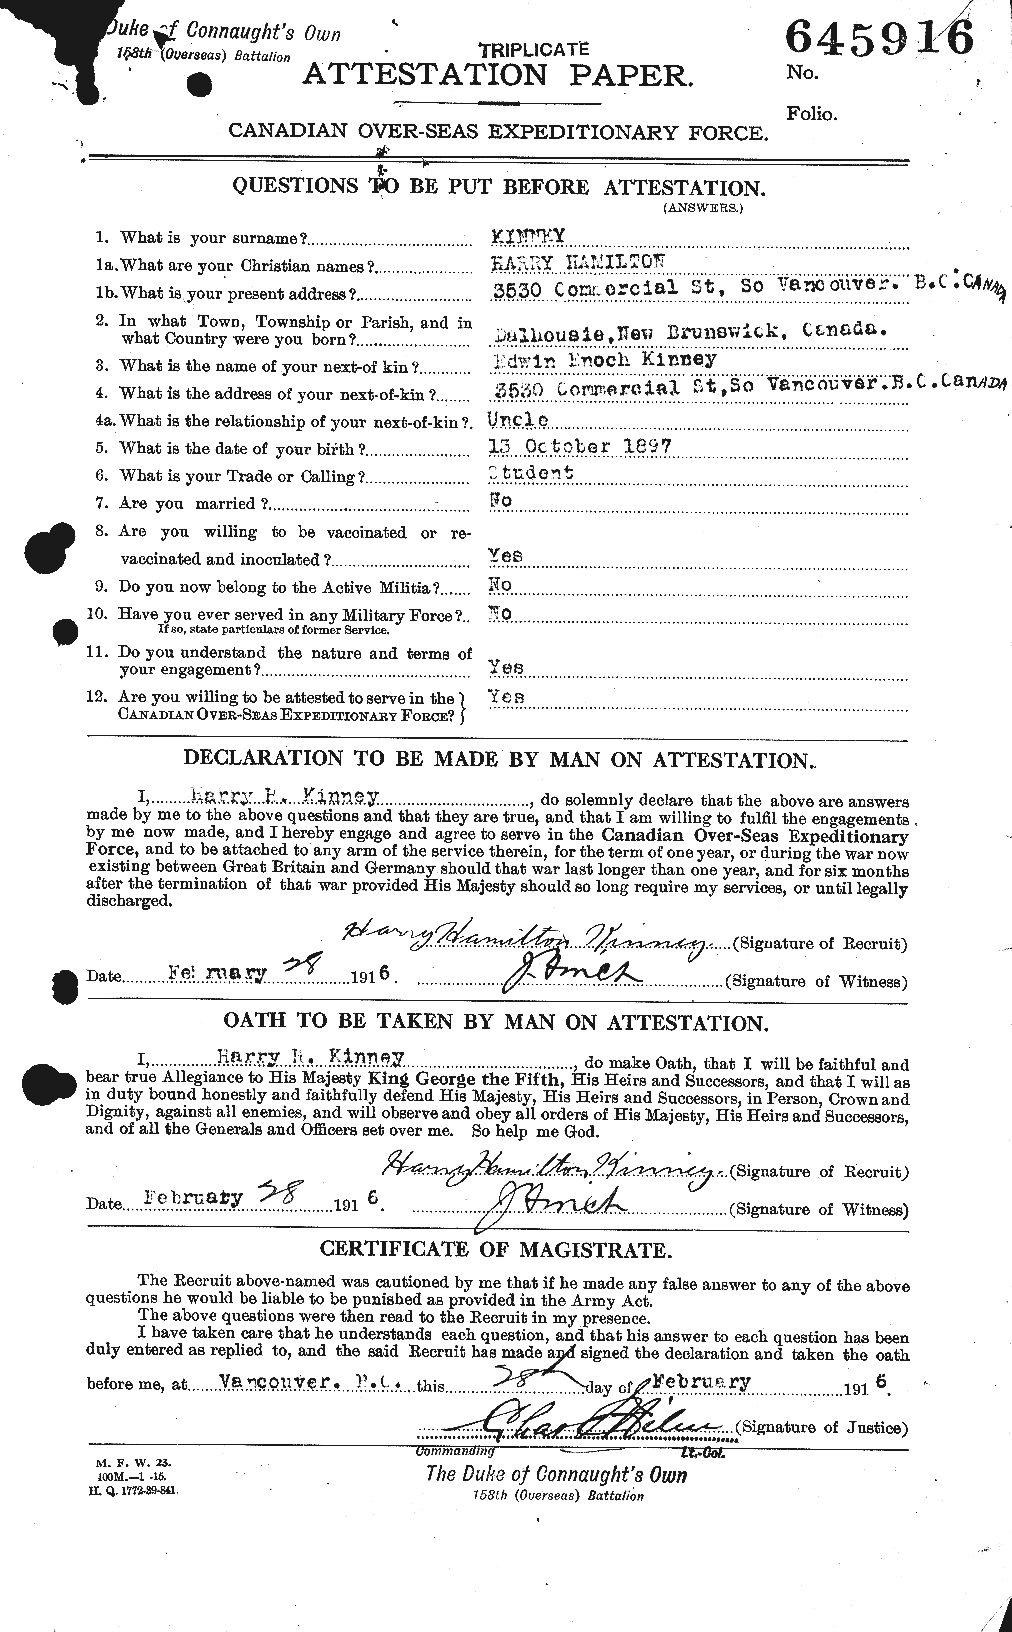 Personnel Records of the First World War - CEF 435088a